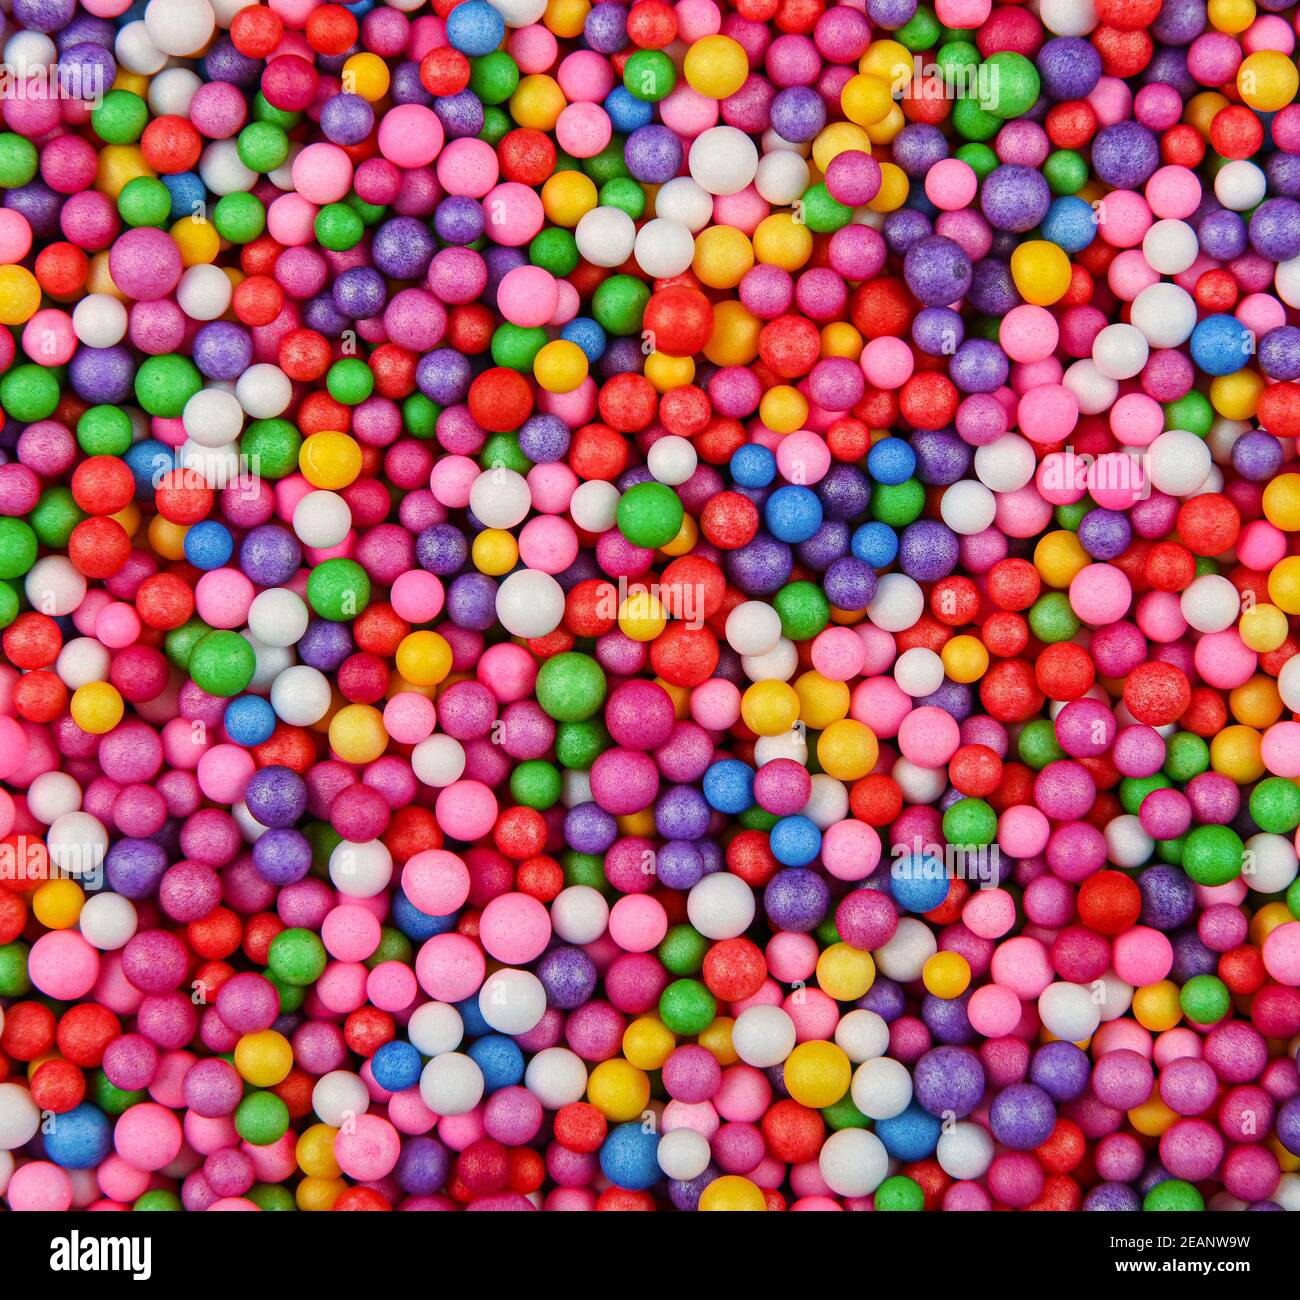 Background of colorful expanded polystyrene balls Stock Photo